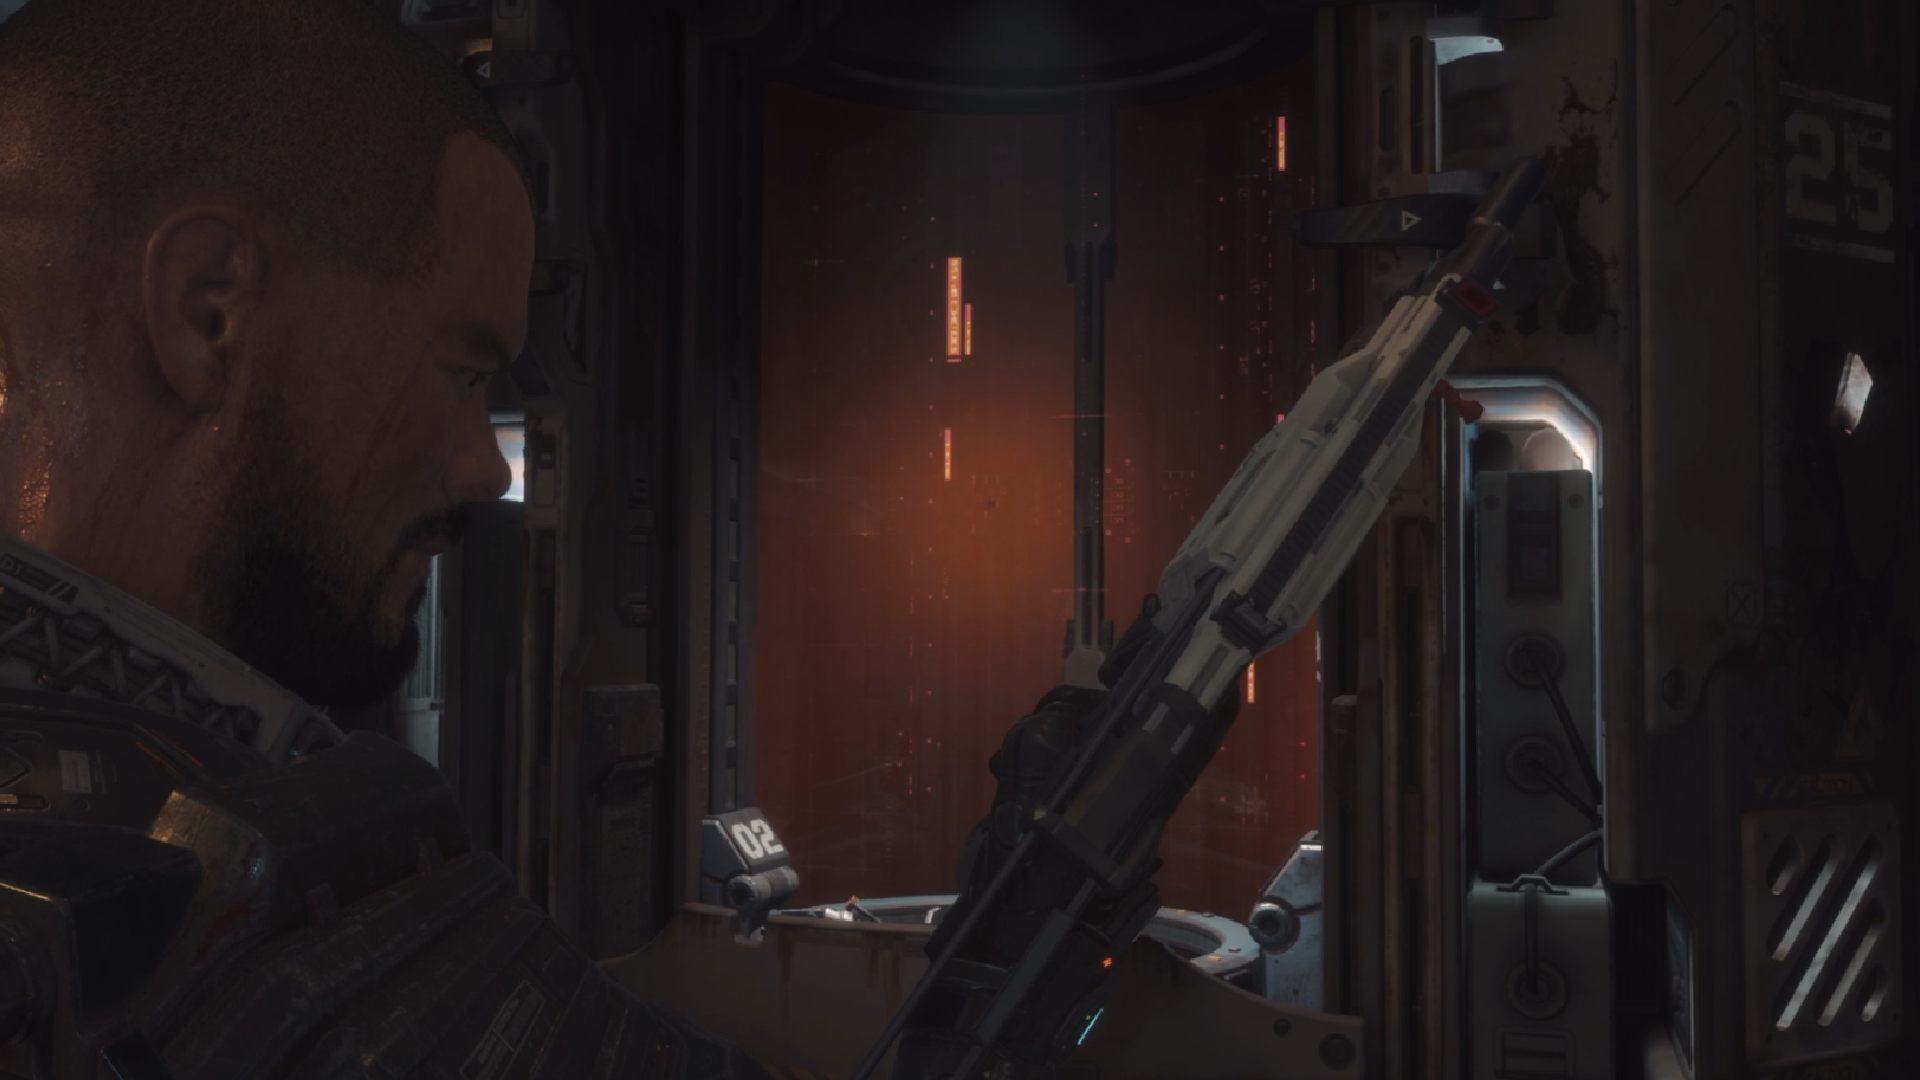 The Callisto Protocol Weapons: Jacob can be seen holding the assault rifle